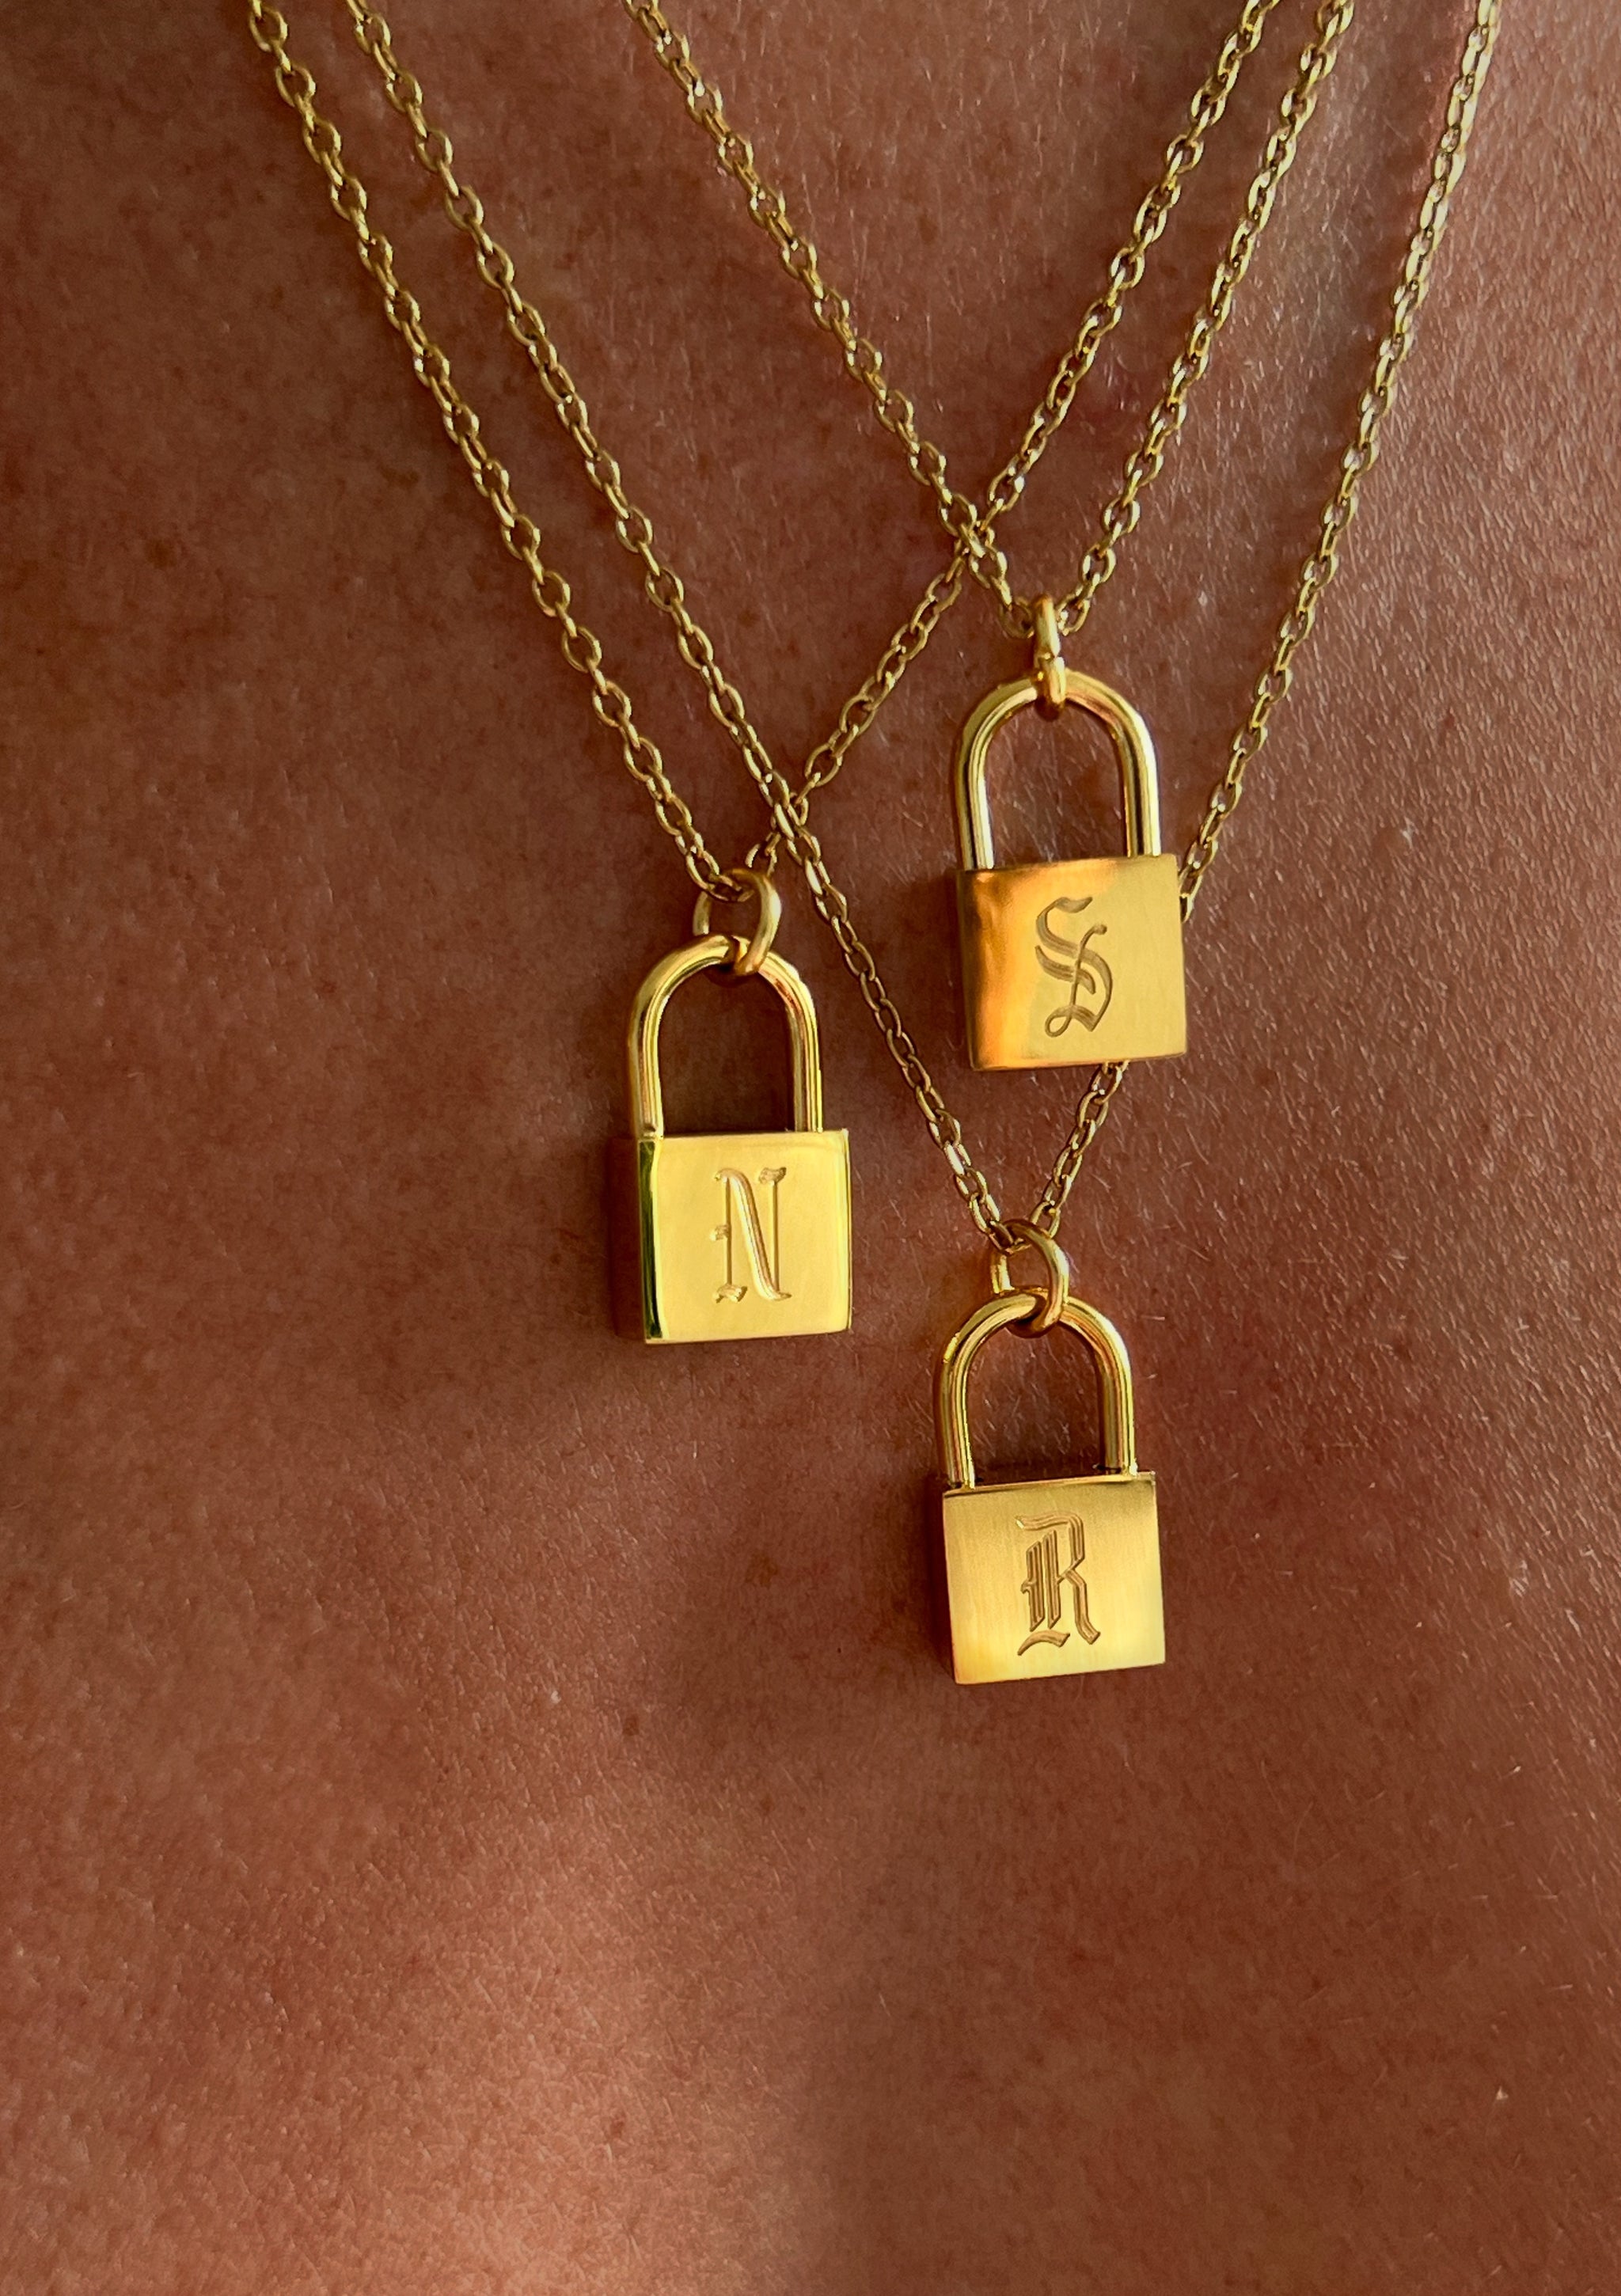 Eternity Lock Chain and Pendant Necklace in Gold | Uncommon James